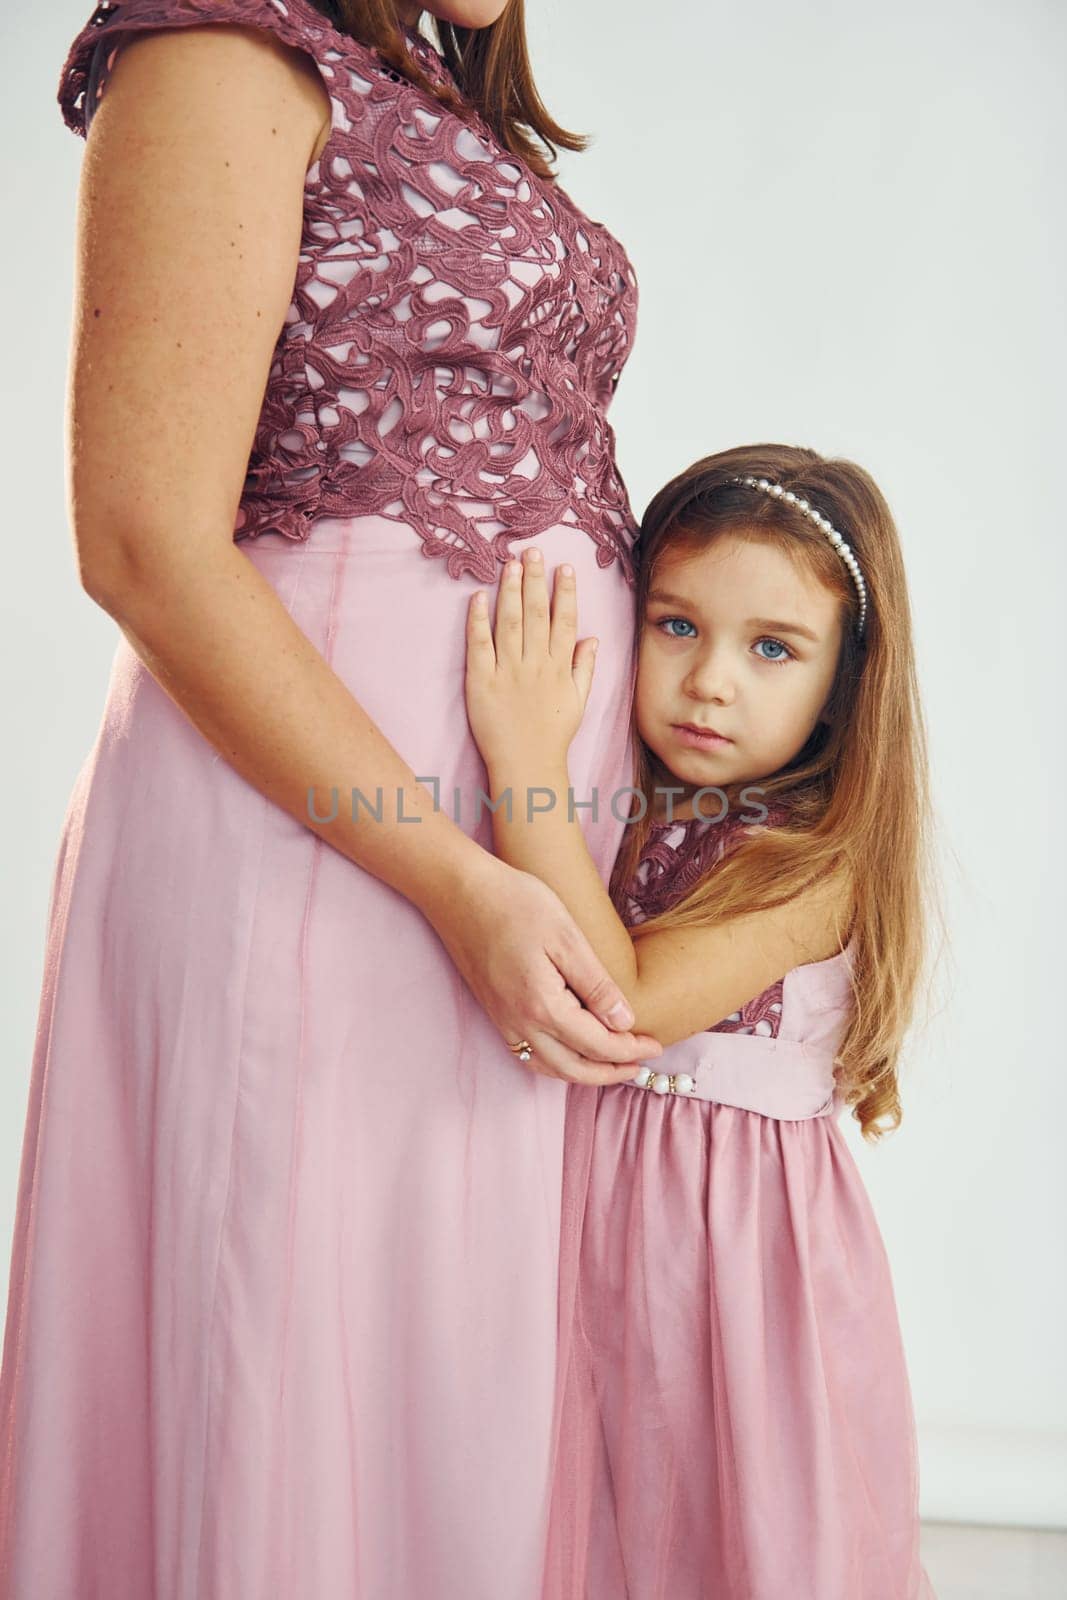 Conception of anticipation. Pregnant mother. Woman in dress standing with her daughter in the studio with white background.